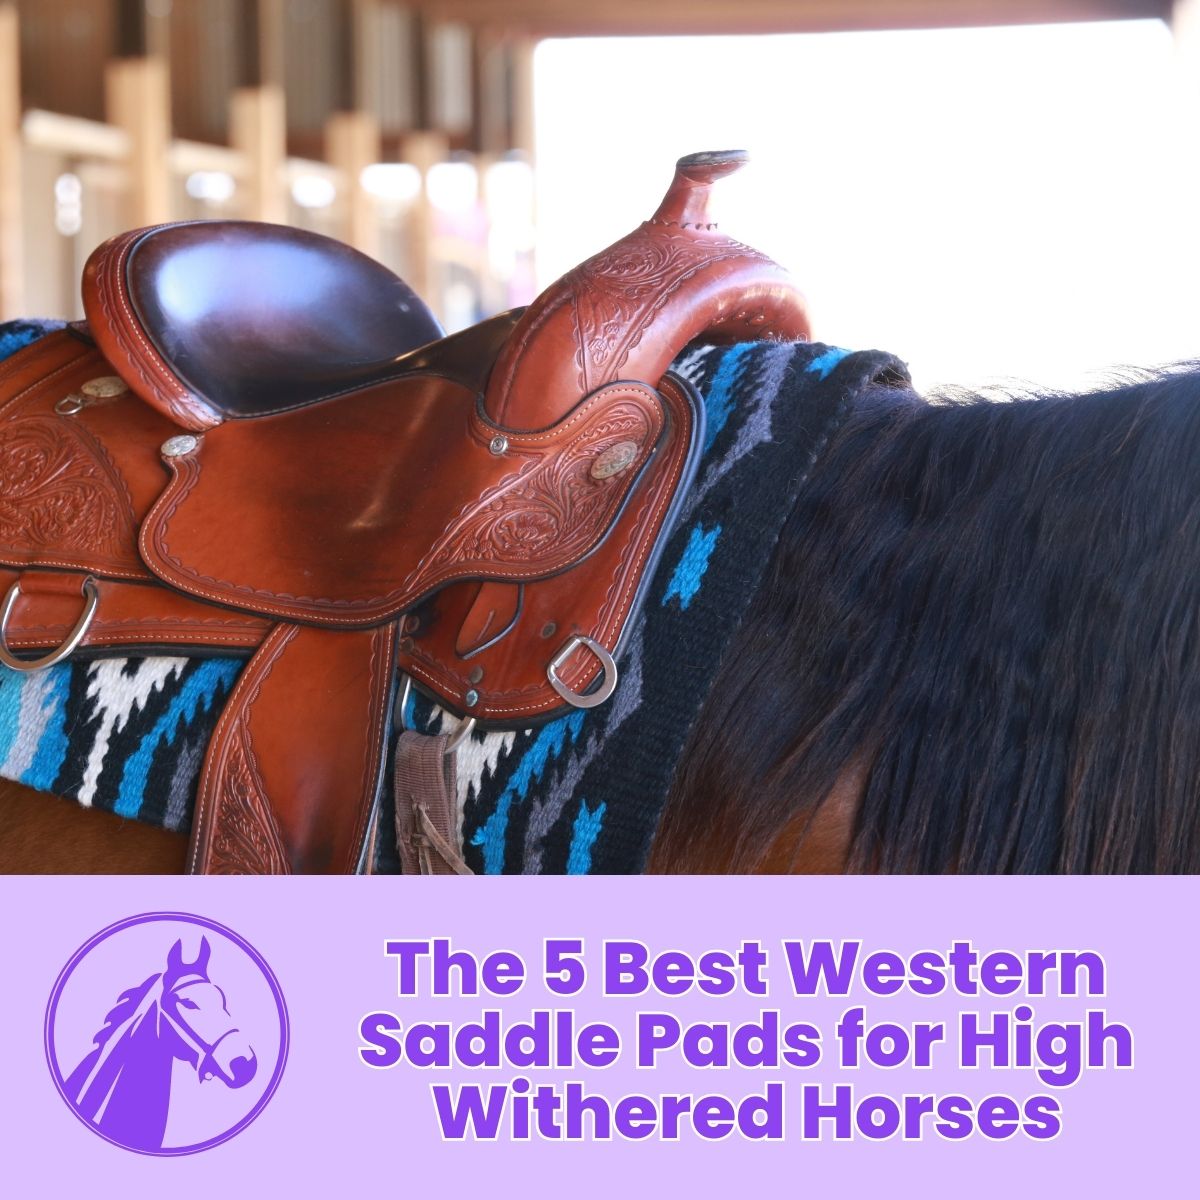 You are currently viewing The 5 Best Western Saddle Pads for High Withered Horses